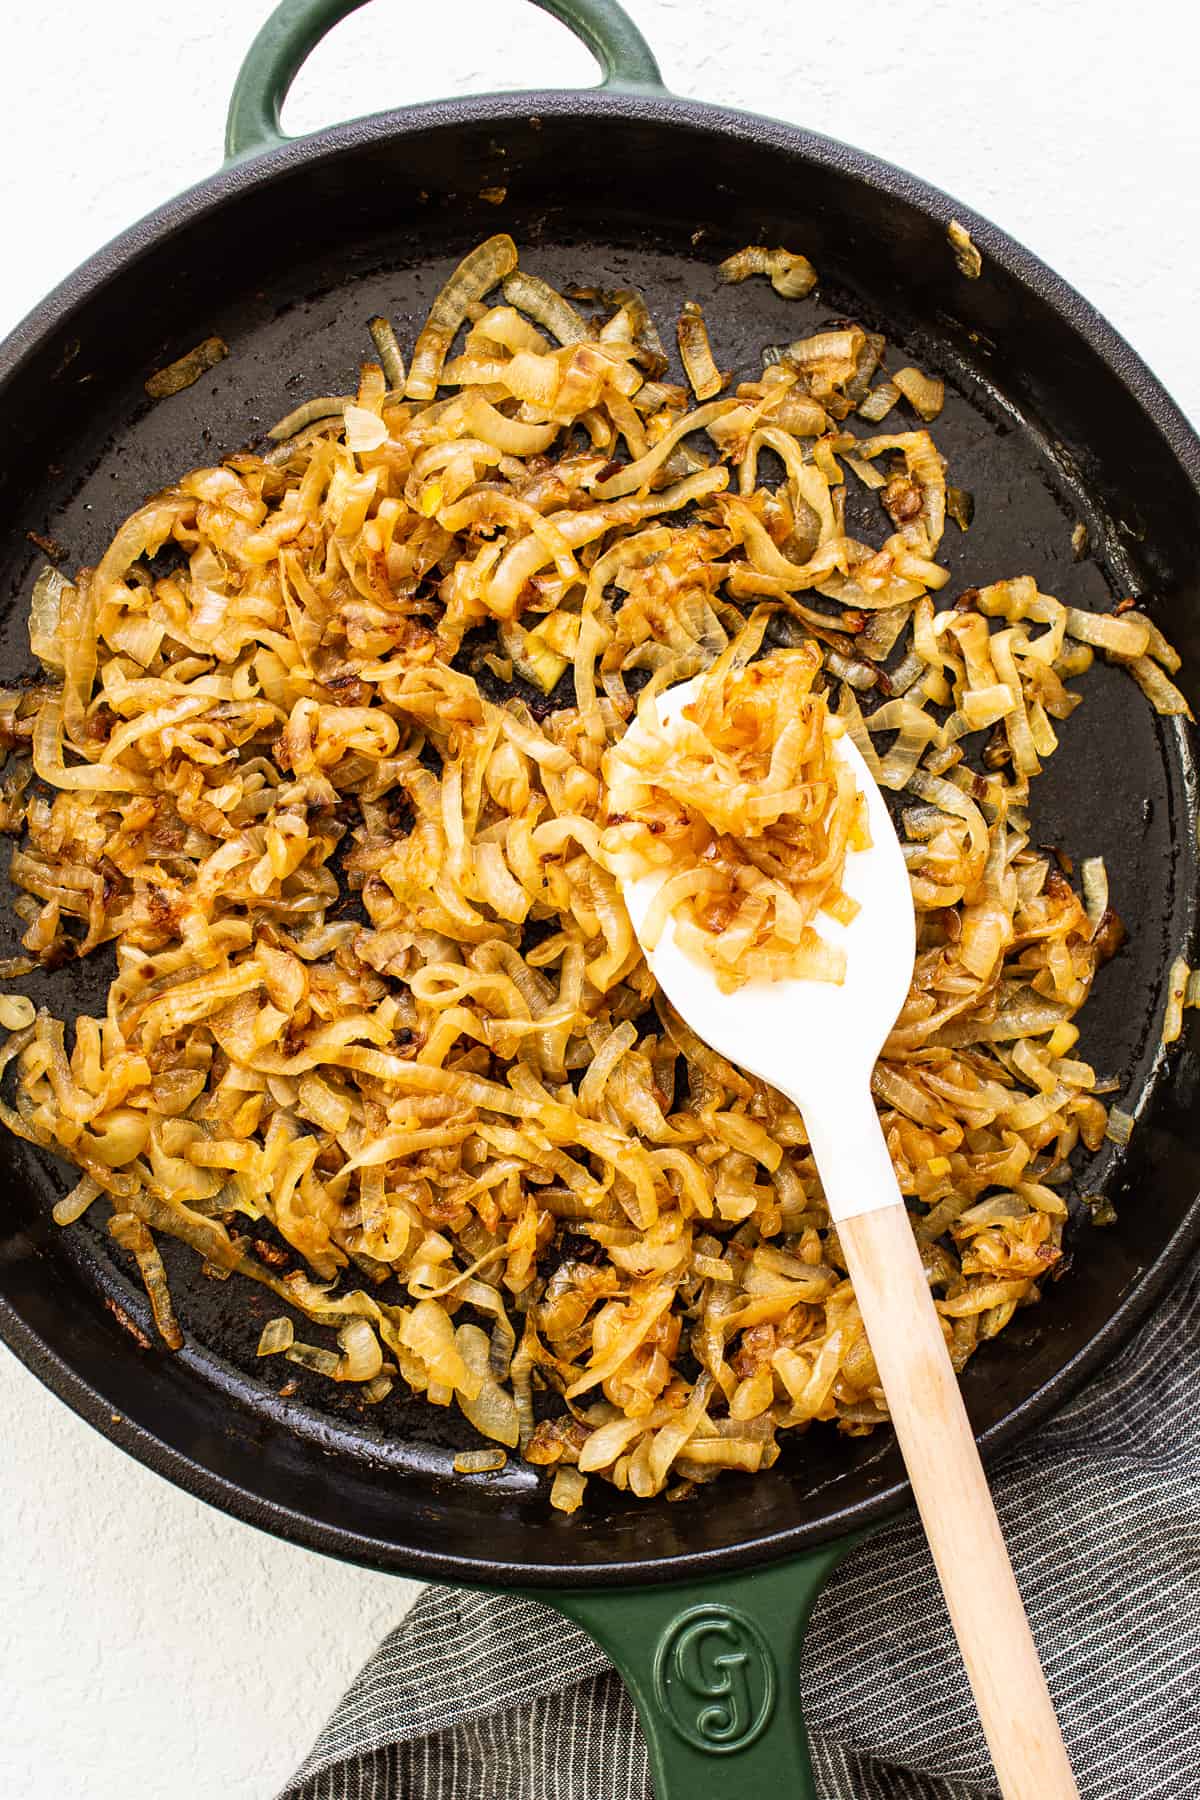 Browned caramelized onions in a skillet.